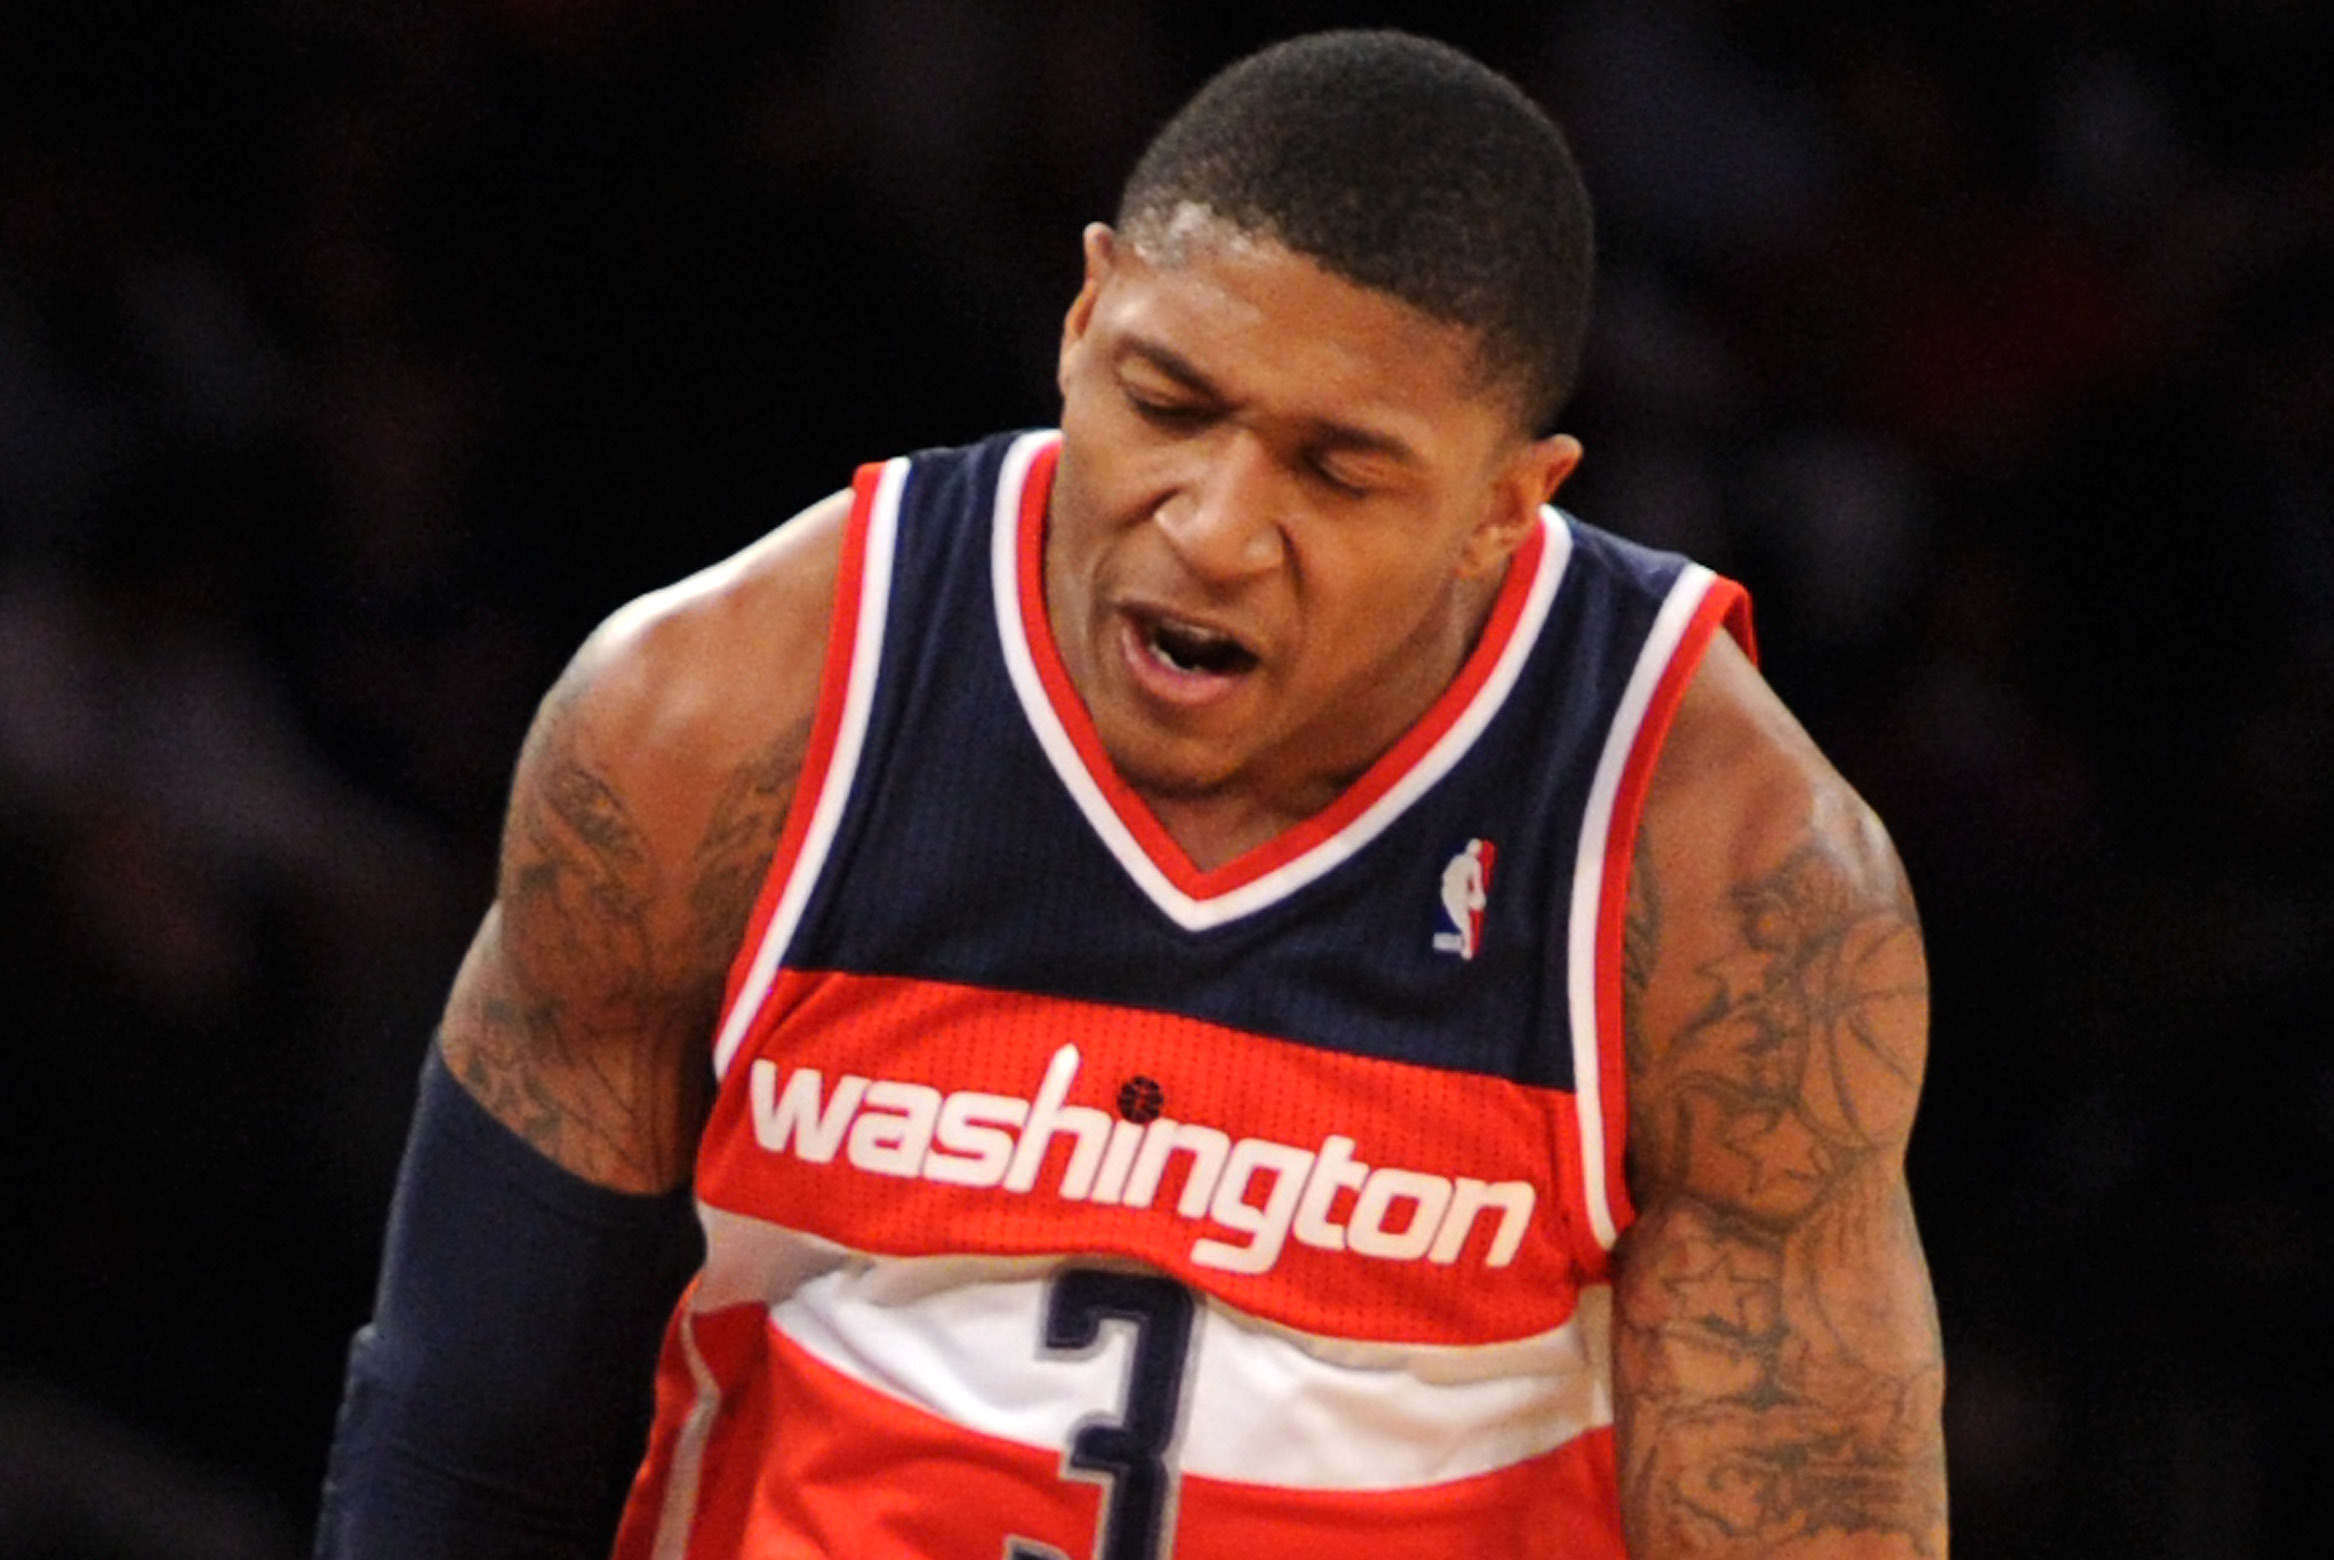 beal wizards jersey